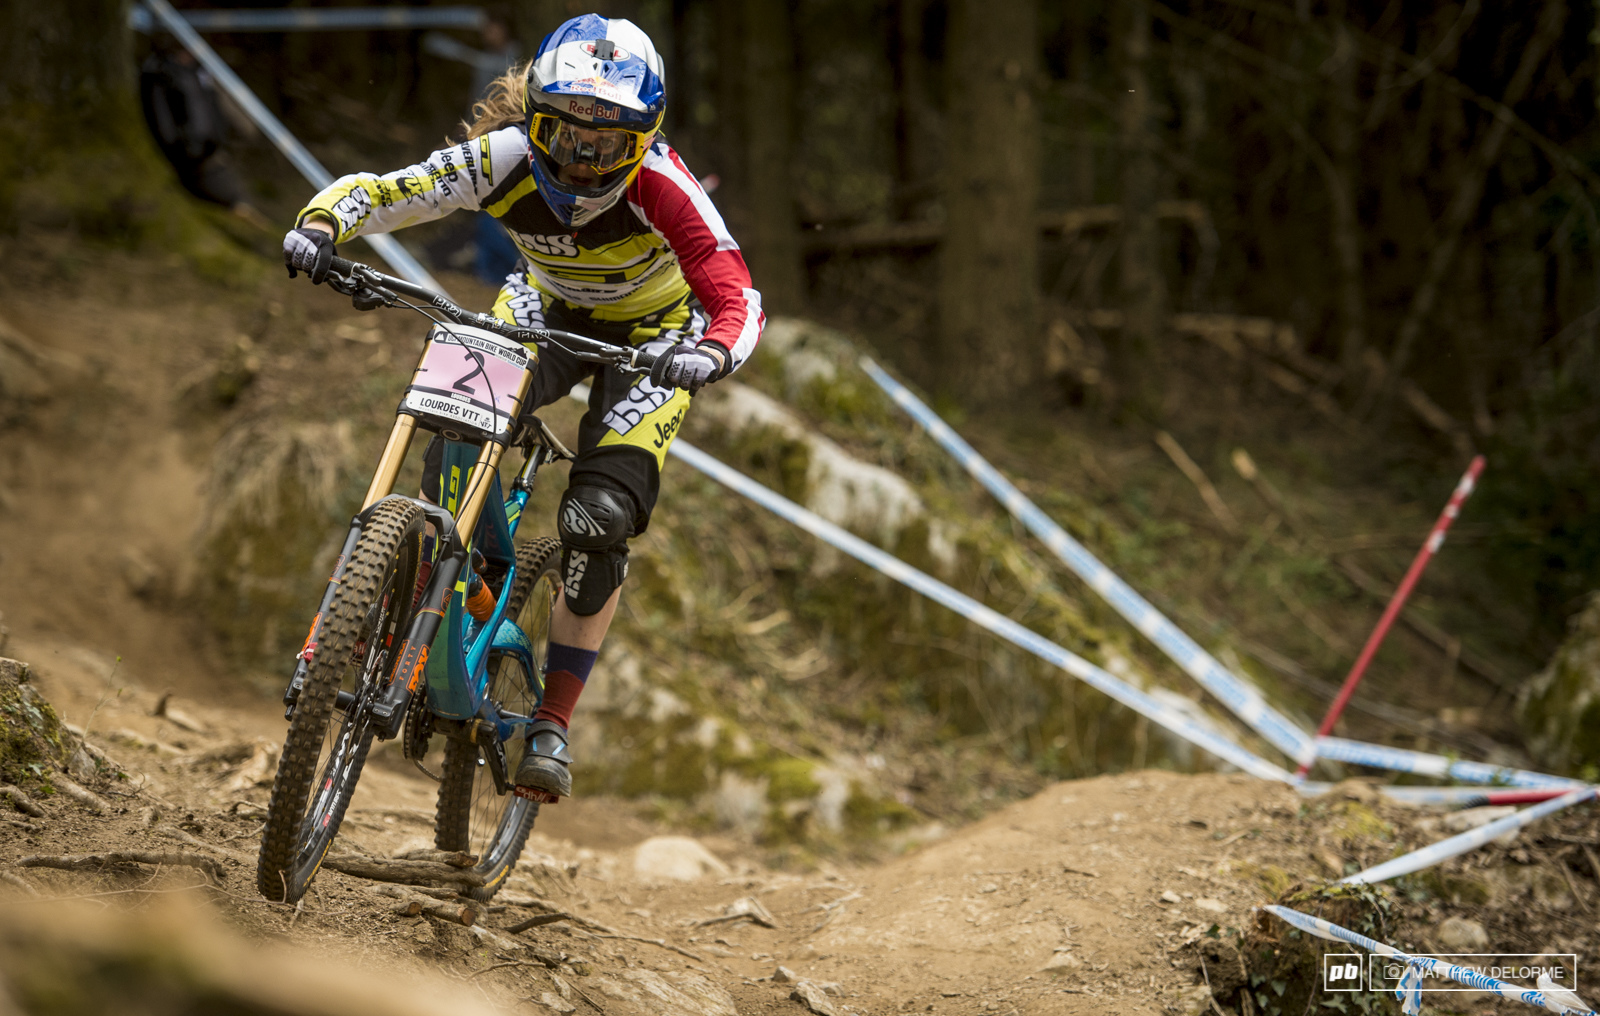 Rachel Atherton was second today, down six seconds on Hannah. Rest assured, second won't be good enough for her tomorrow.